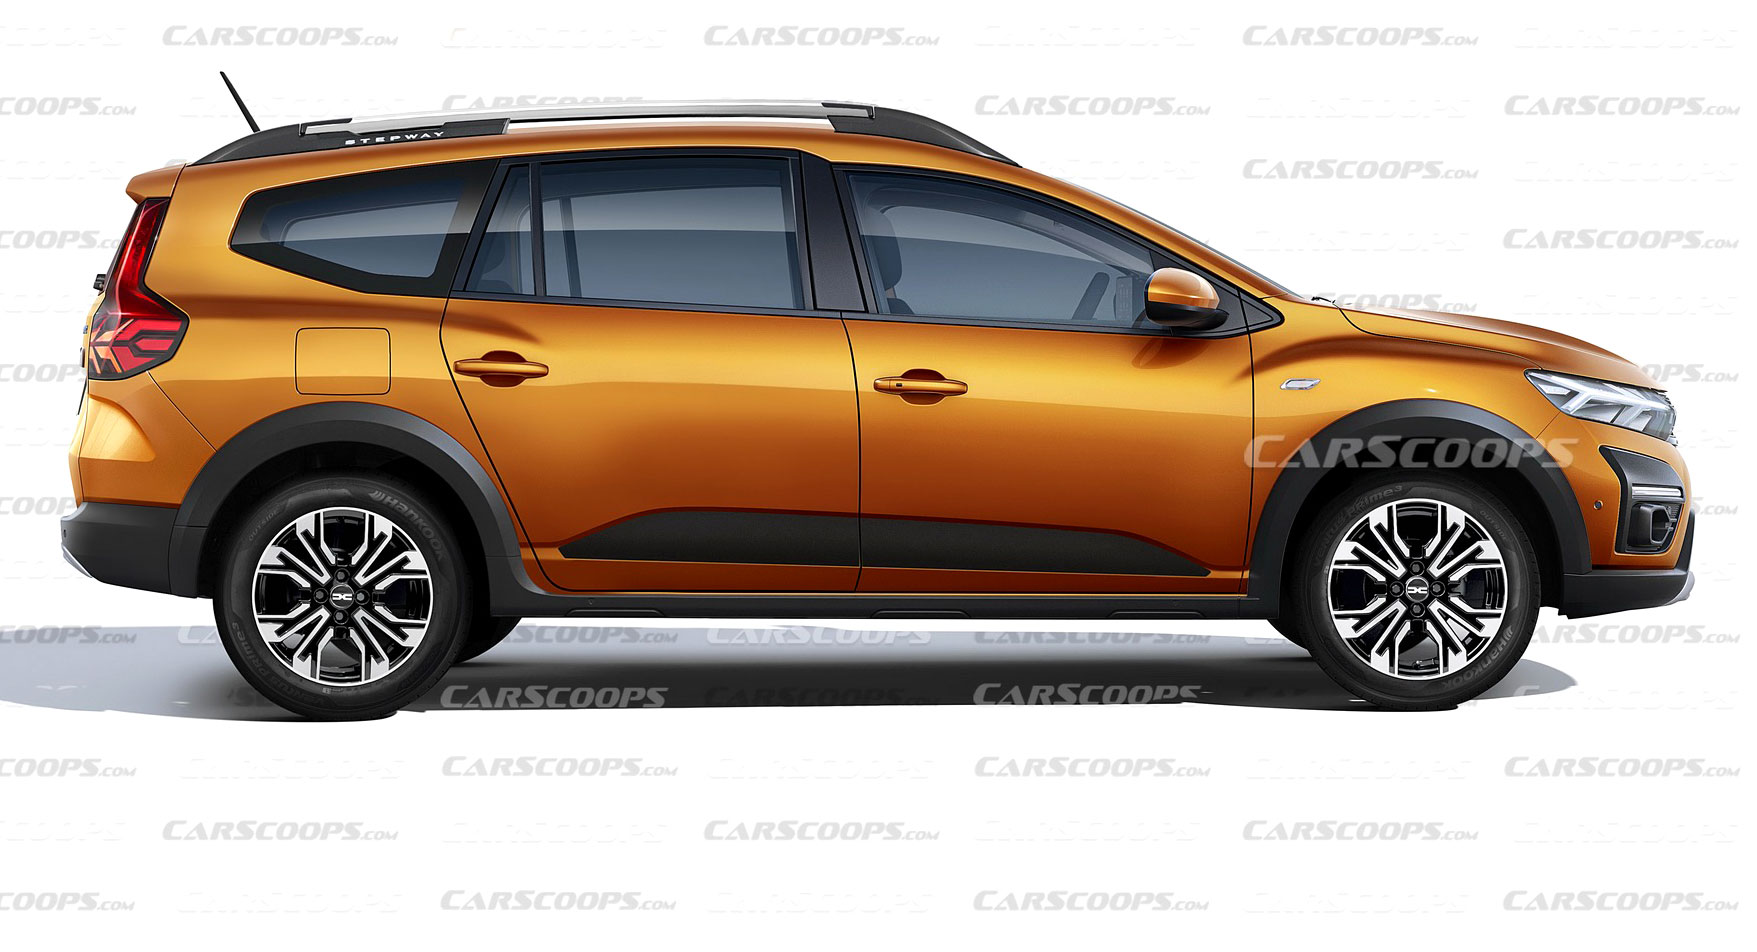 New Dacia Jogger 7-Seater Crossover Wagon: This Is What It Should